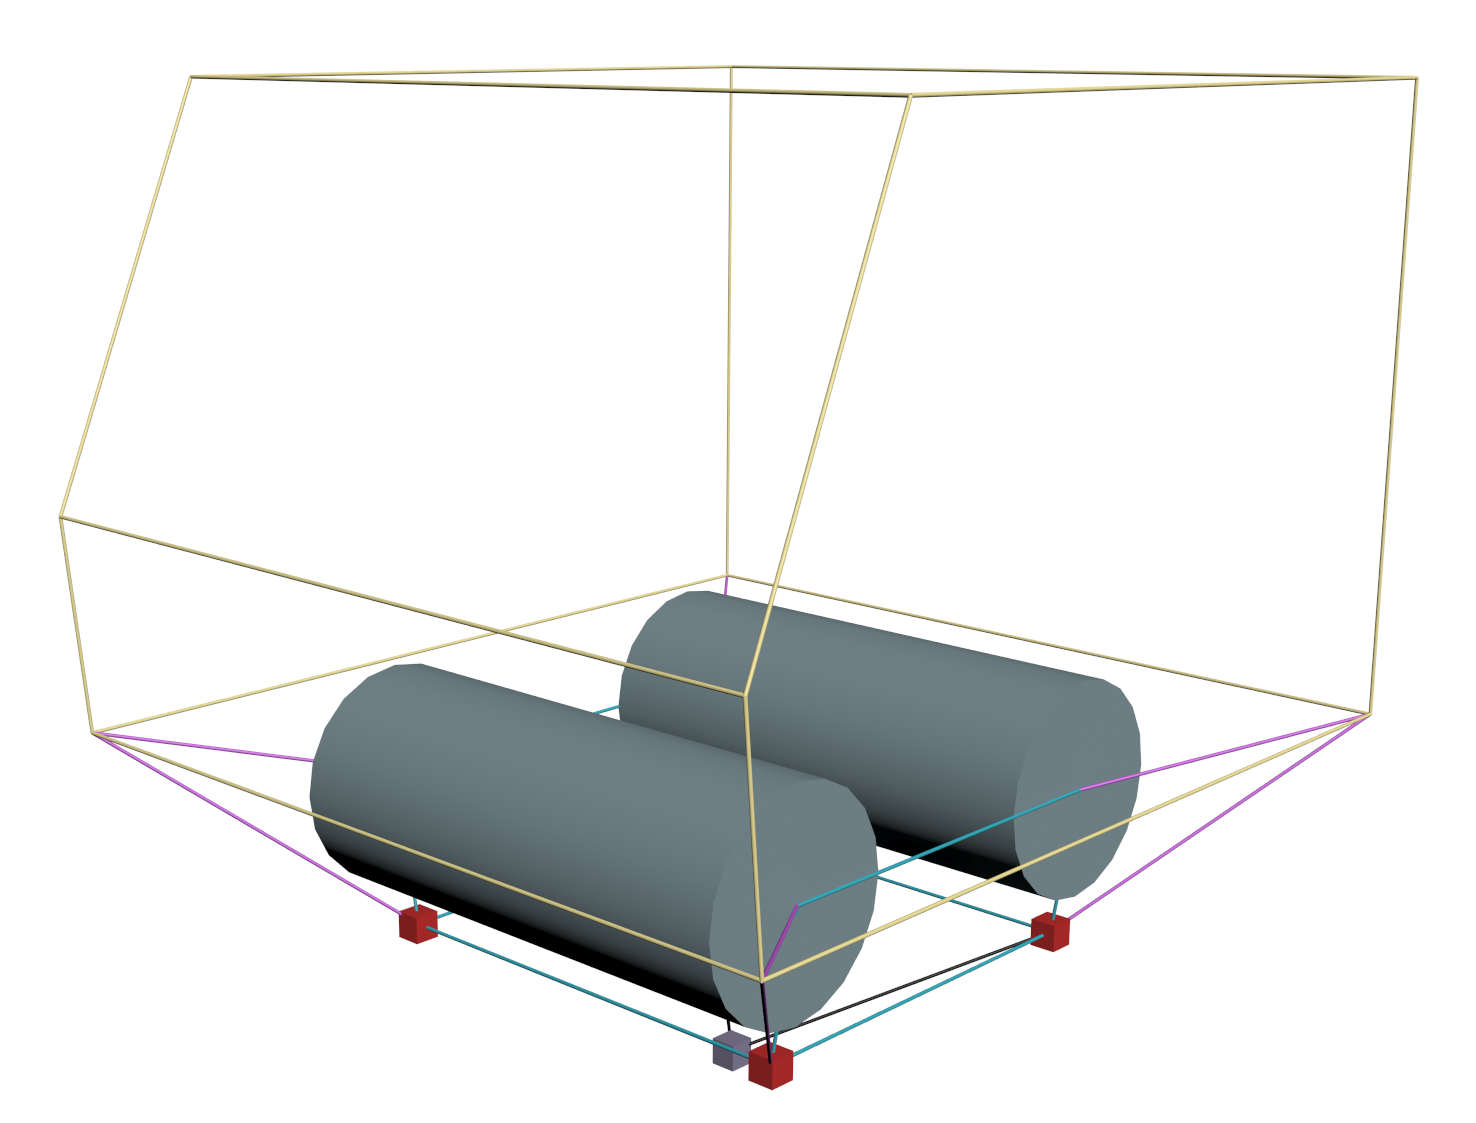 fig5-chassis